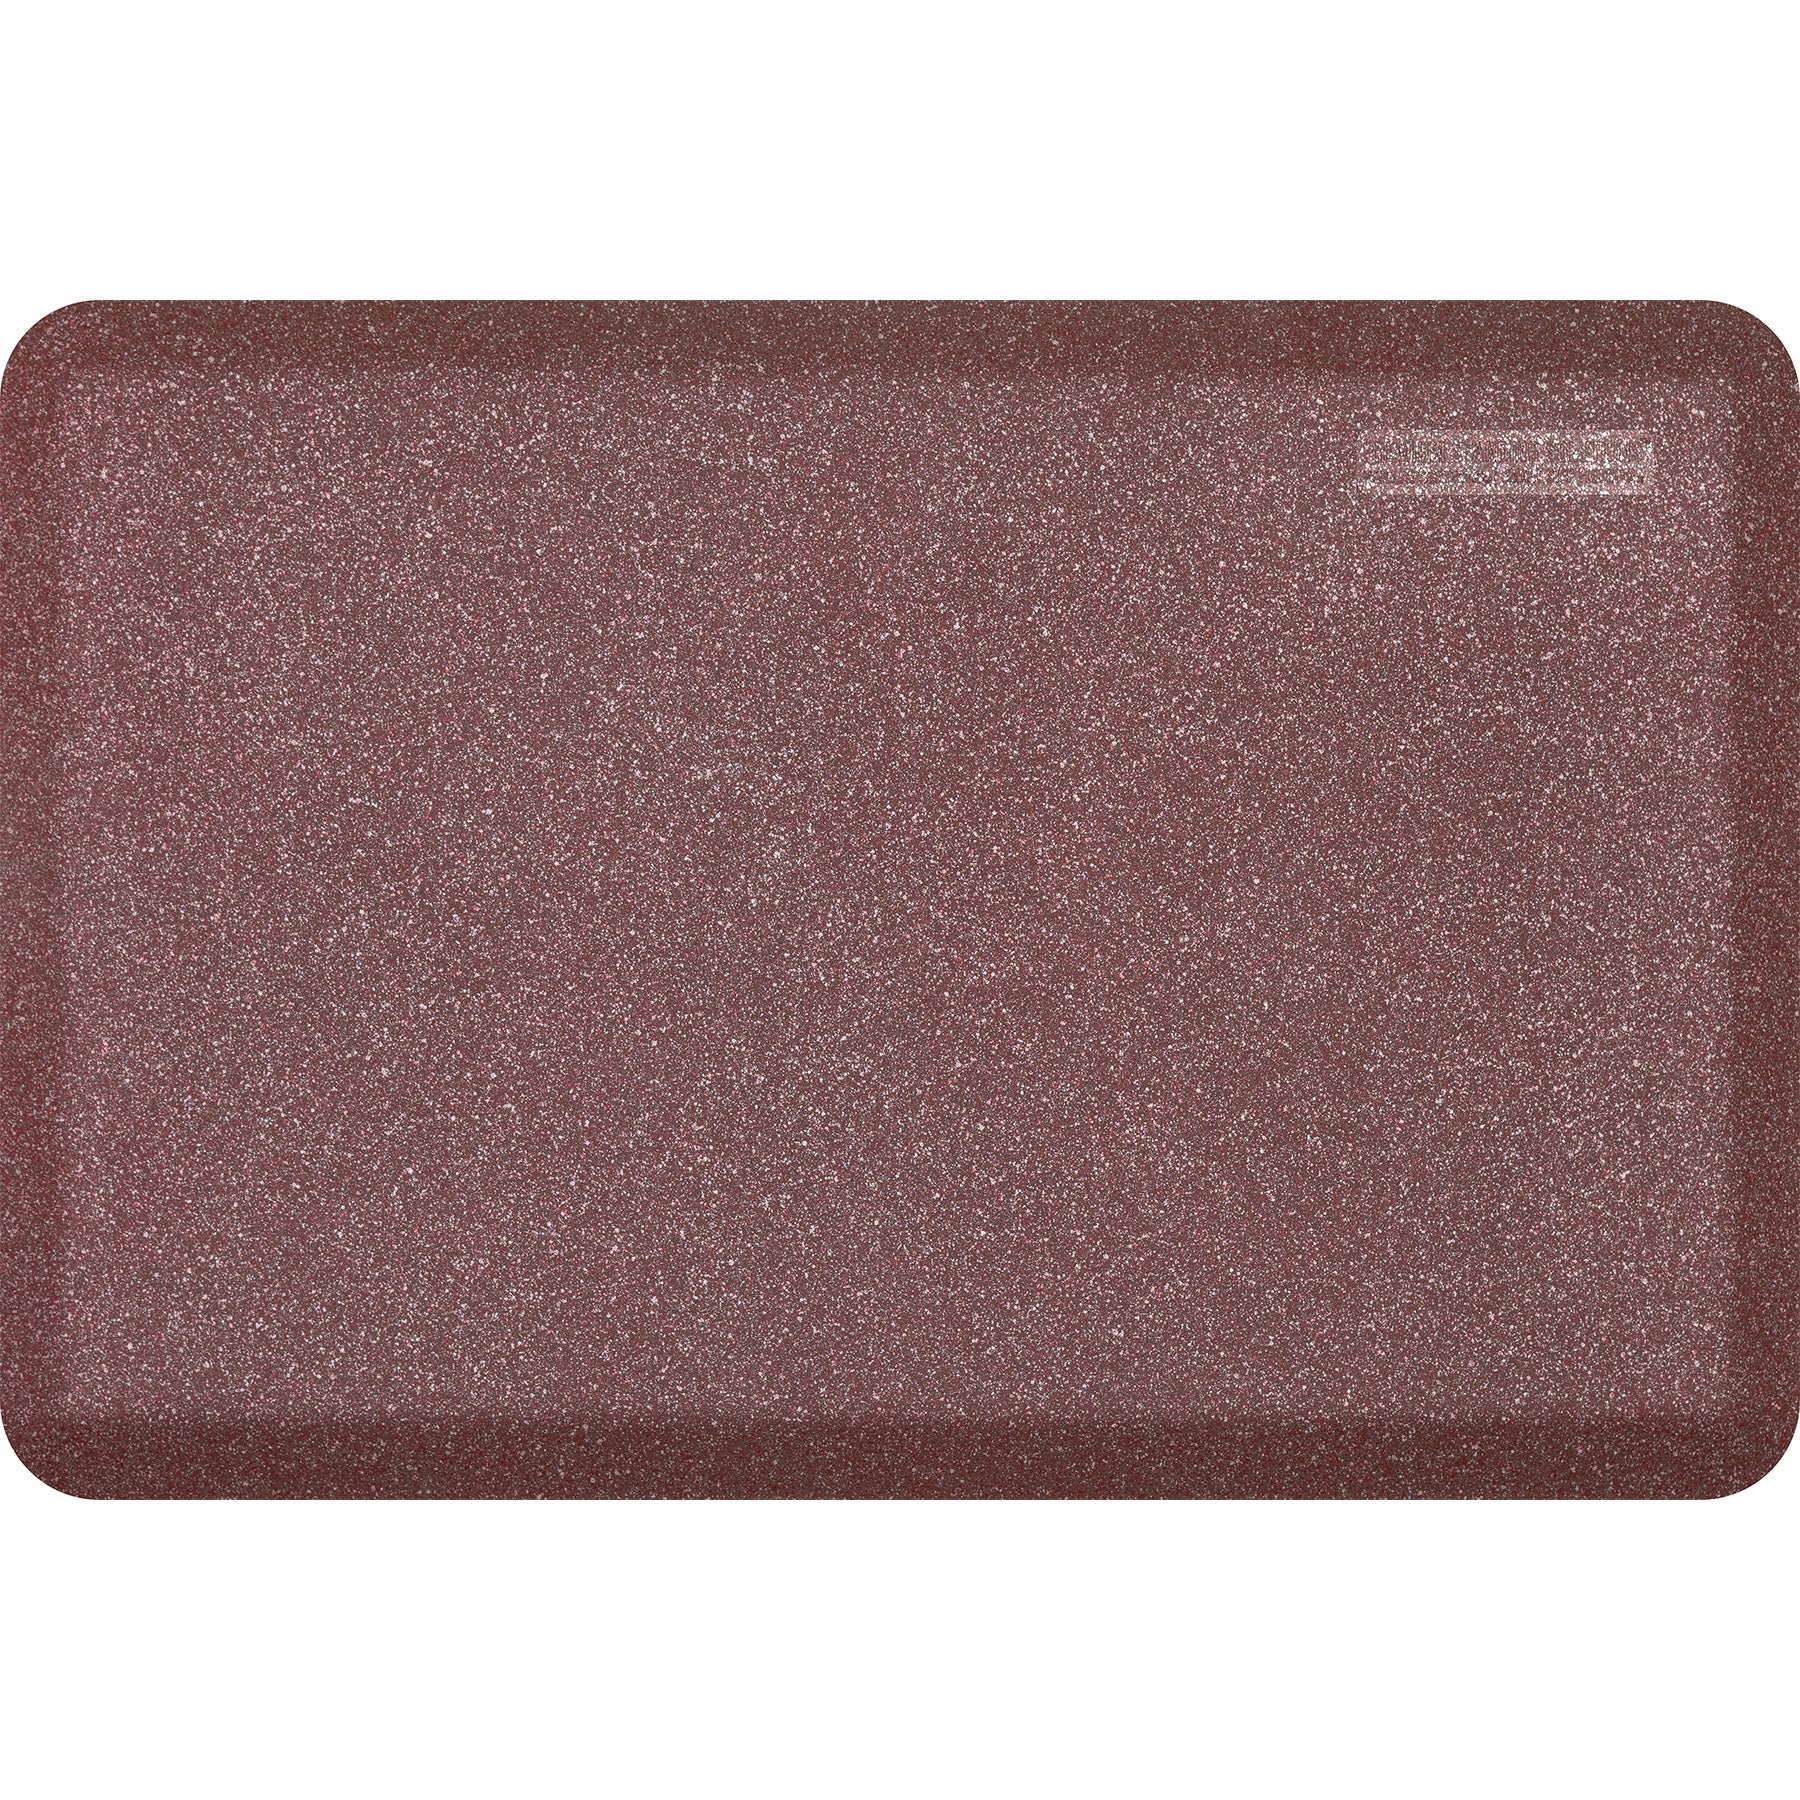 Buy ruby WellnessMats Granite Collection